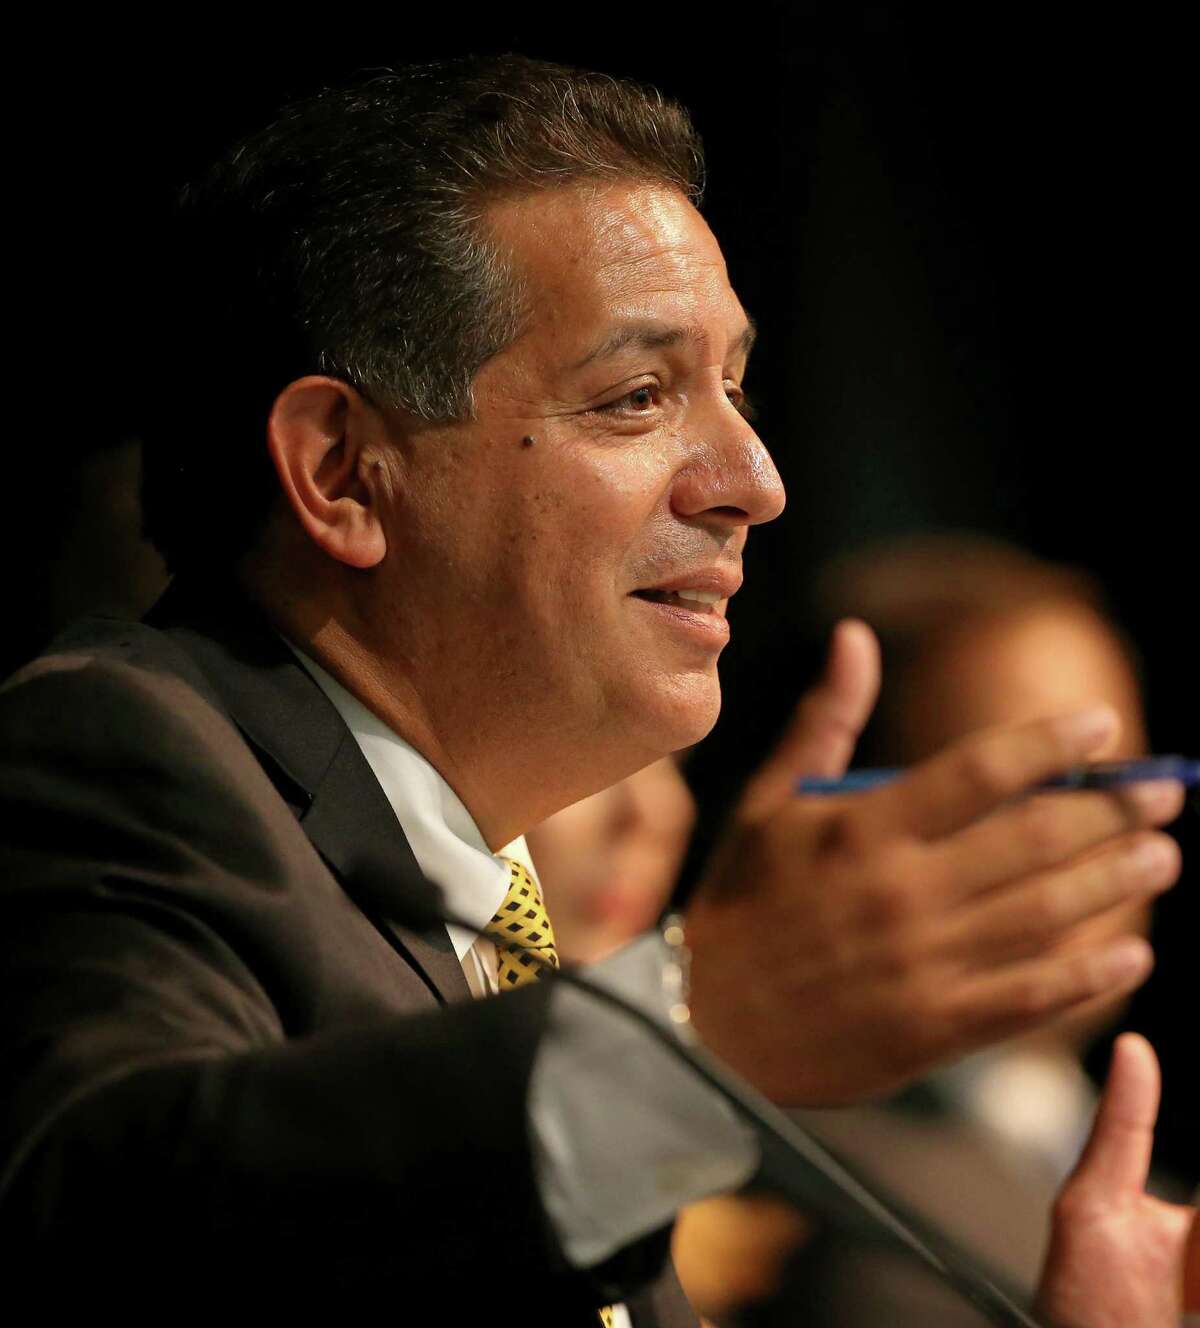 Former State Representative John Lujan speaks during a hearing in 2016 at Texas A&M University San Antonio. Lujan, who lost his re-election campaign in November 2016, is one of two Republicans seeking to represent House District 118.